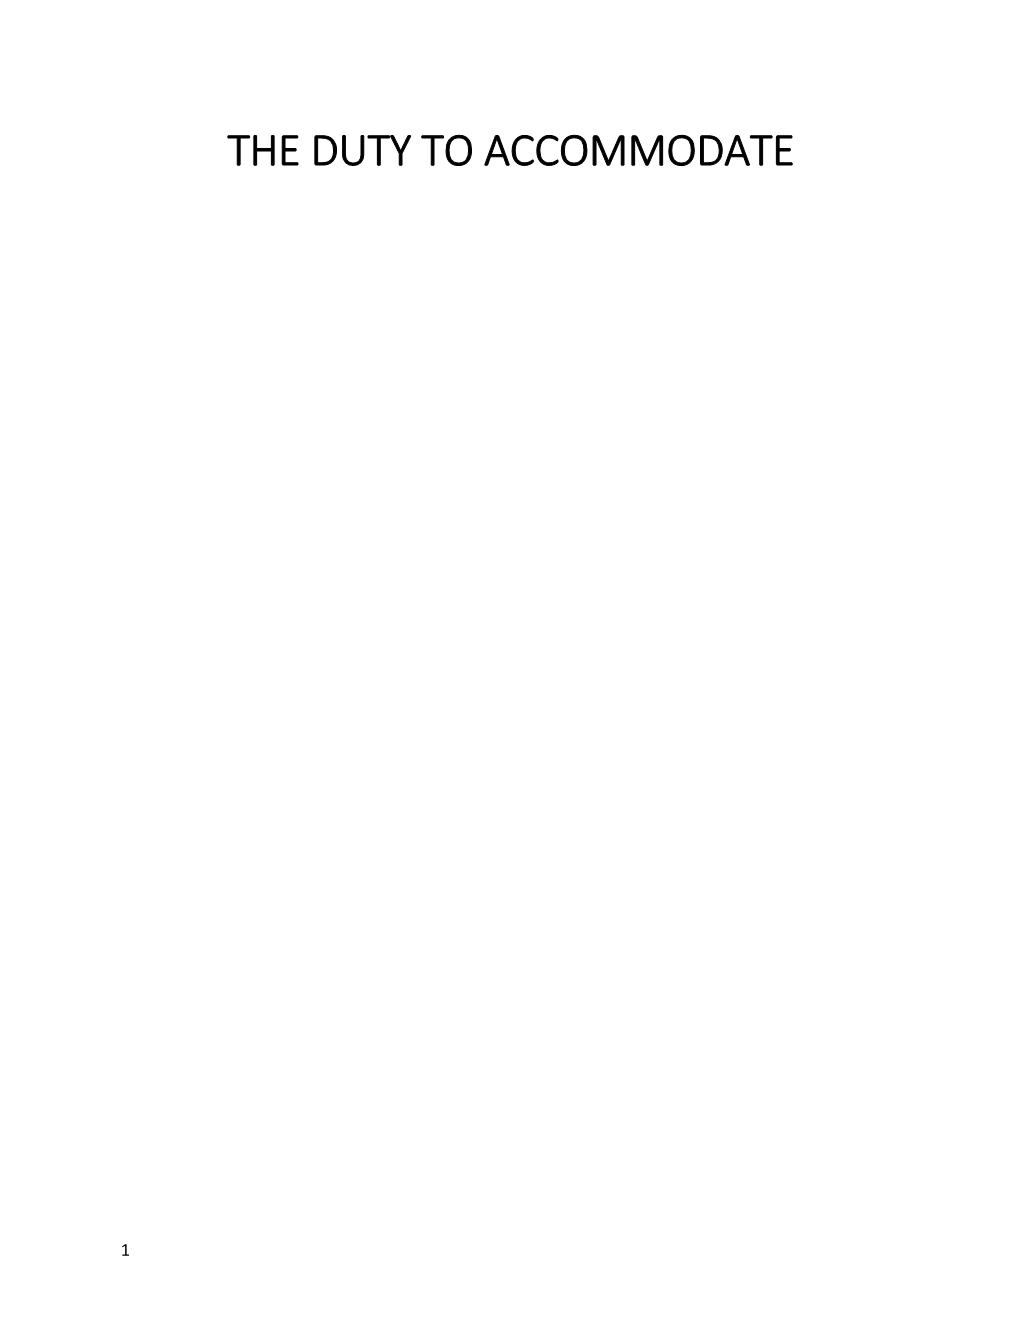 The Duty to Accommodate